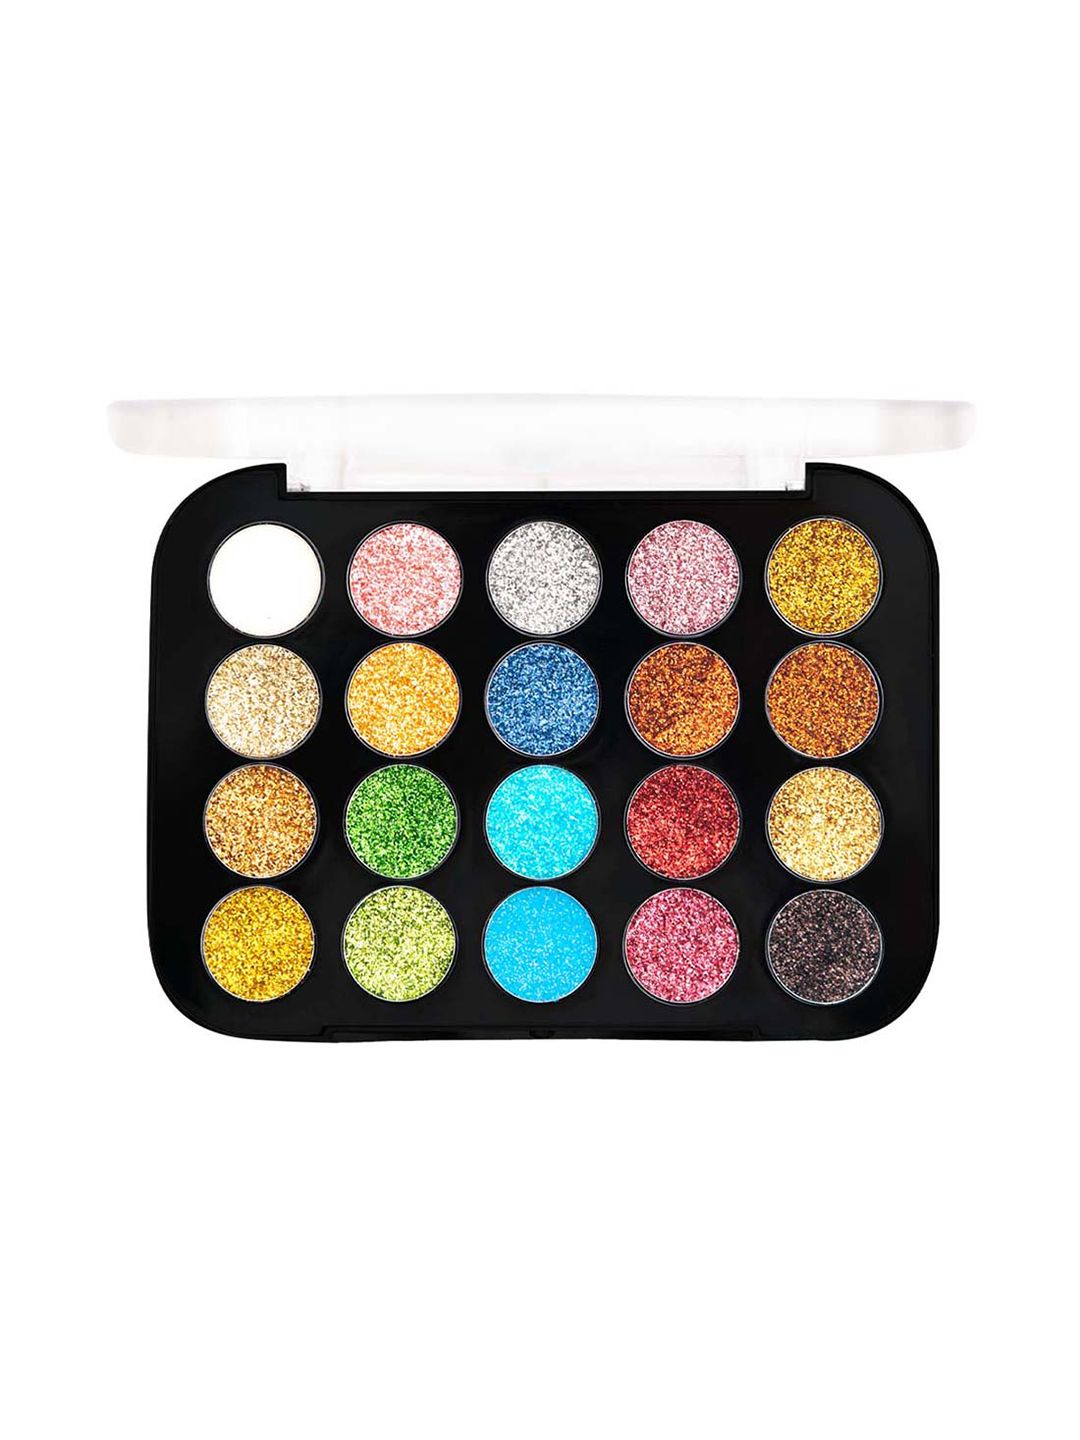 SHRYOAN Glitter Eyeshadow Palette SYES-061-GP-SH02-Multi Color Price in India